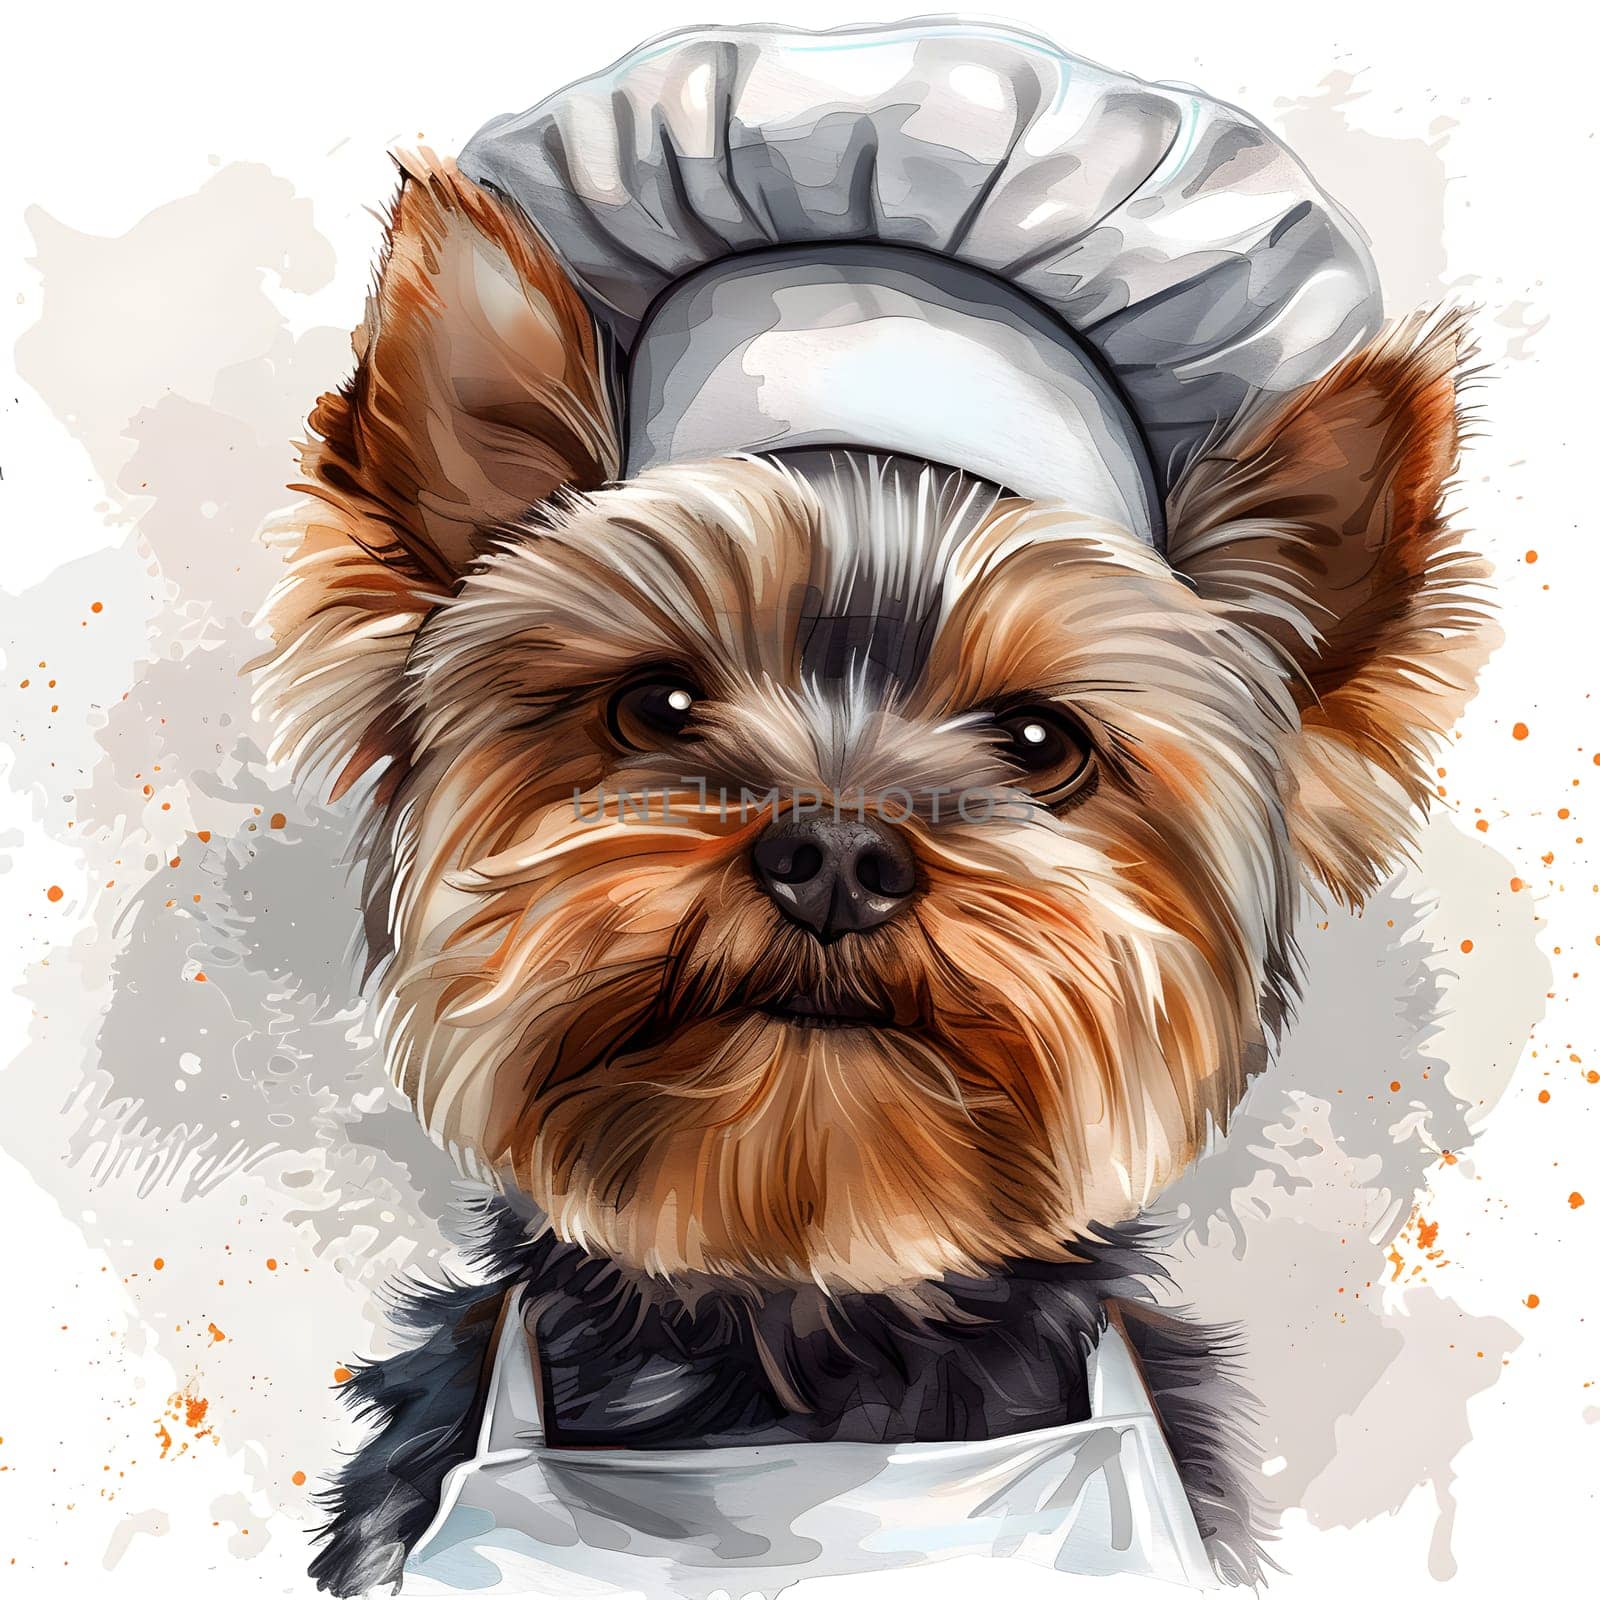 A small carnivorous Yorkshire Terrier, known as a toy dog breed, is dressed in a chefs hat and apron. This working animal has a fawn coat and a cute snout, making it a beloved companion dog